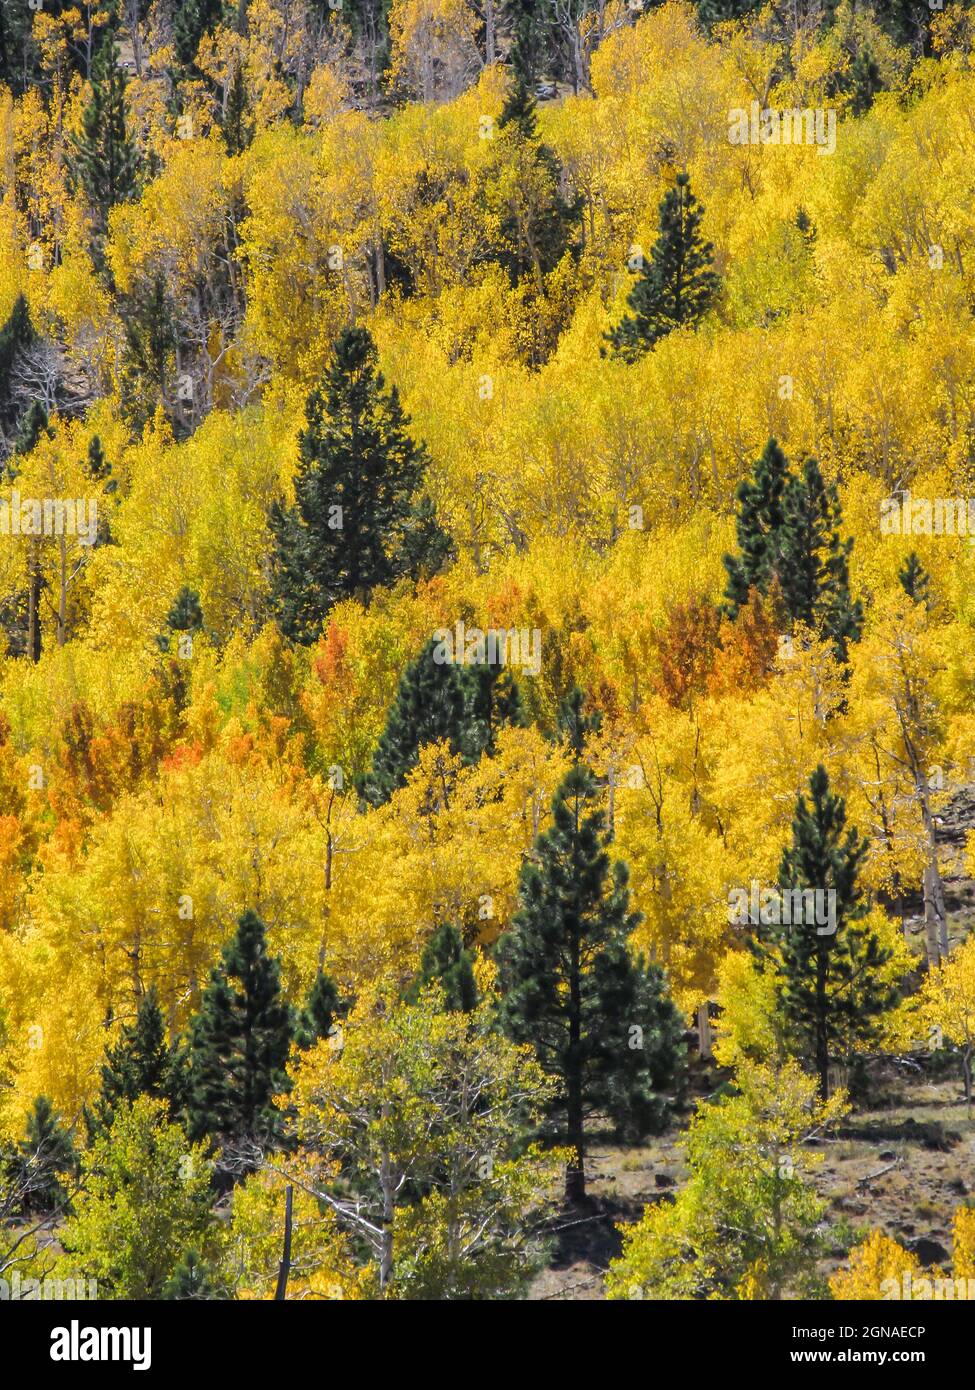 A few Pyramidal shaped Ponderosa pines, Pinus ponderosa, in a sea of golden colored Quivering Aspens, Populus tremuloides, on the mountain slopes in t Stock Photo